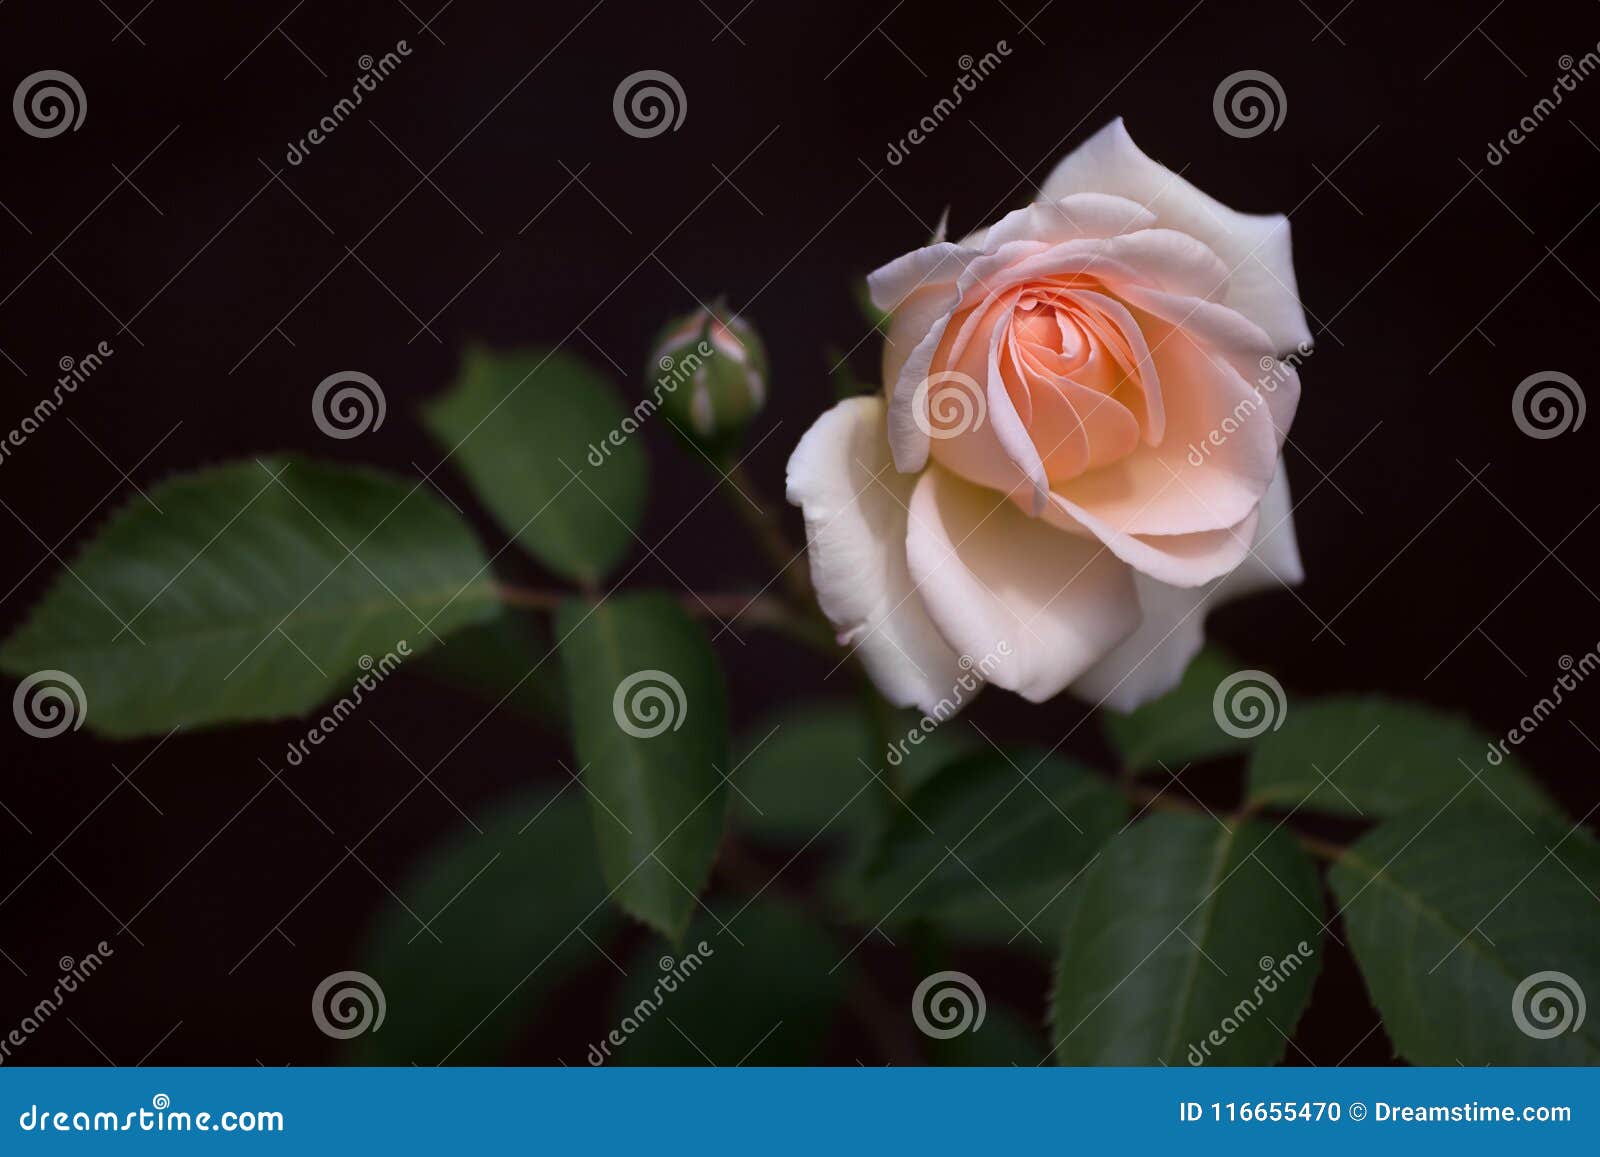 fresh young rose bud blooming in dark ambience